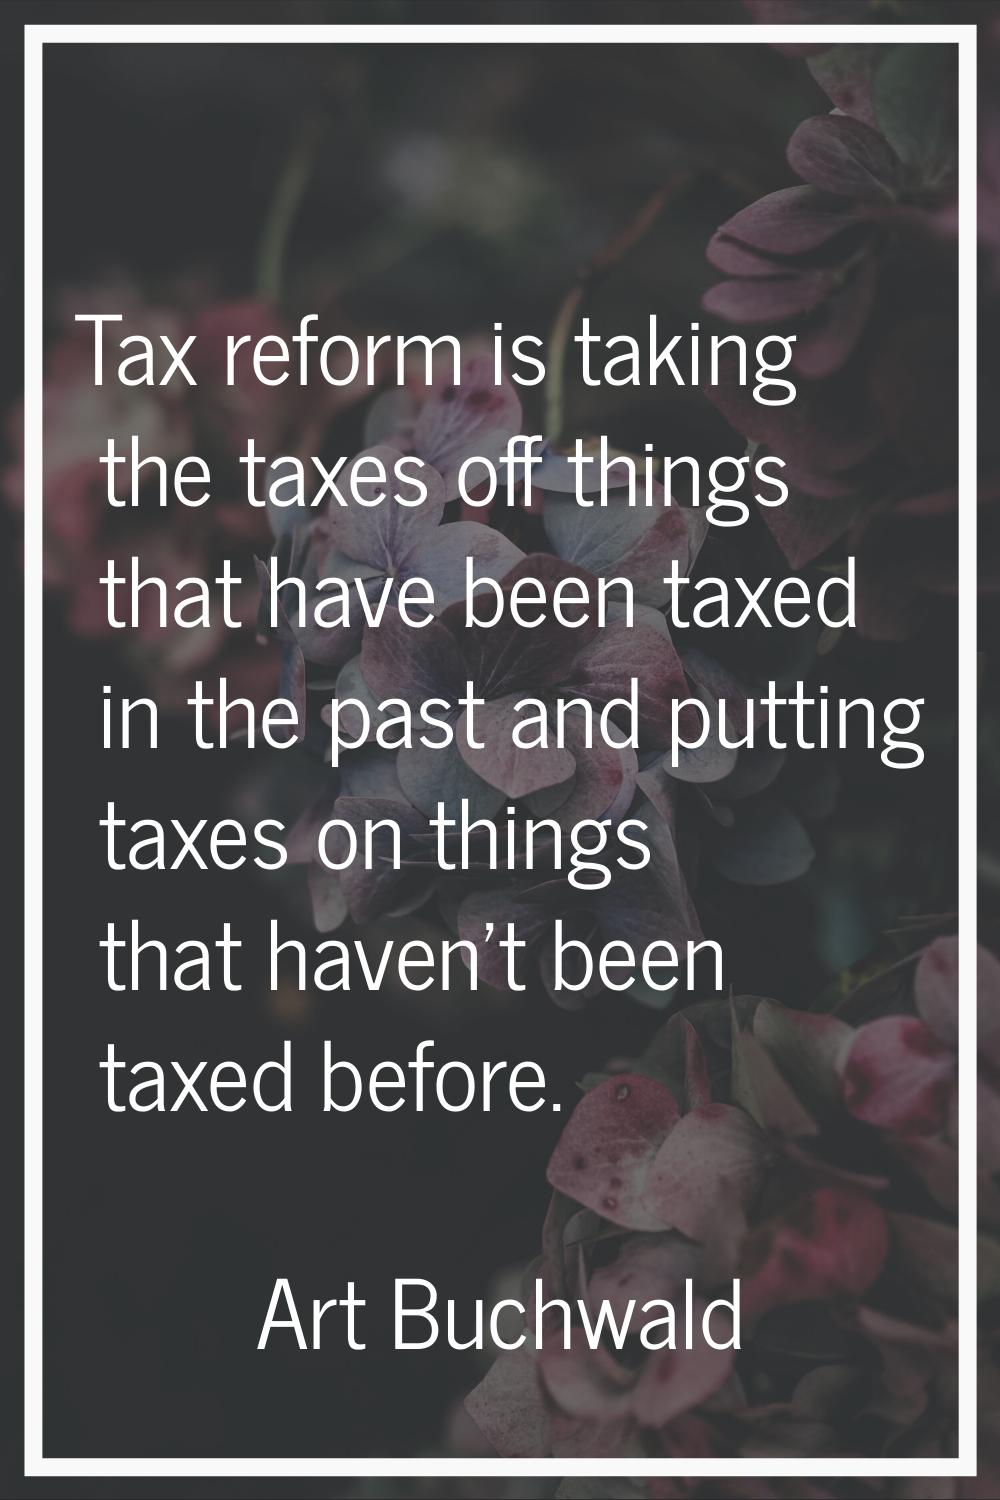 Tax reform is taking the taxes off things that have been taxed in the past and putting taxes on thi